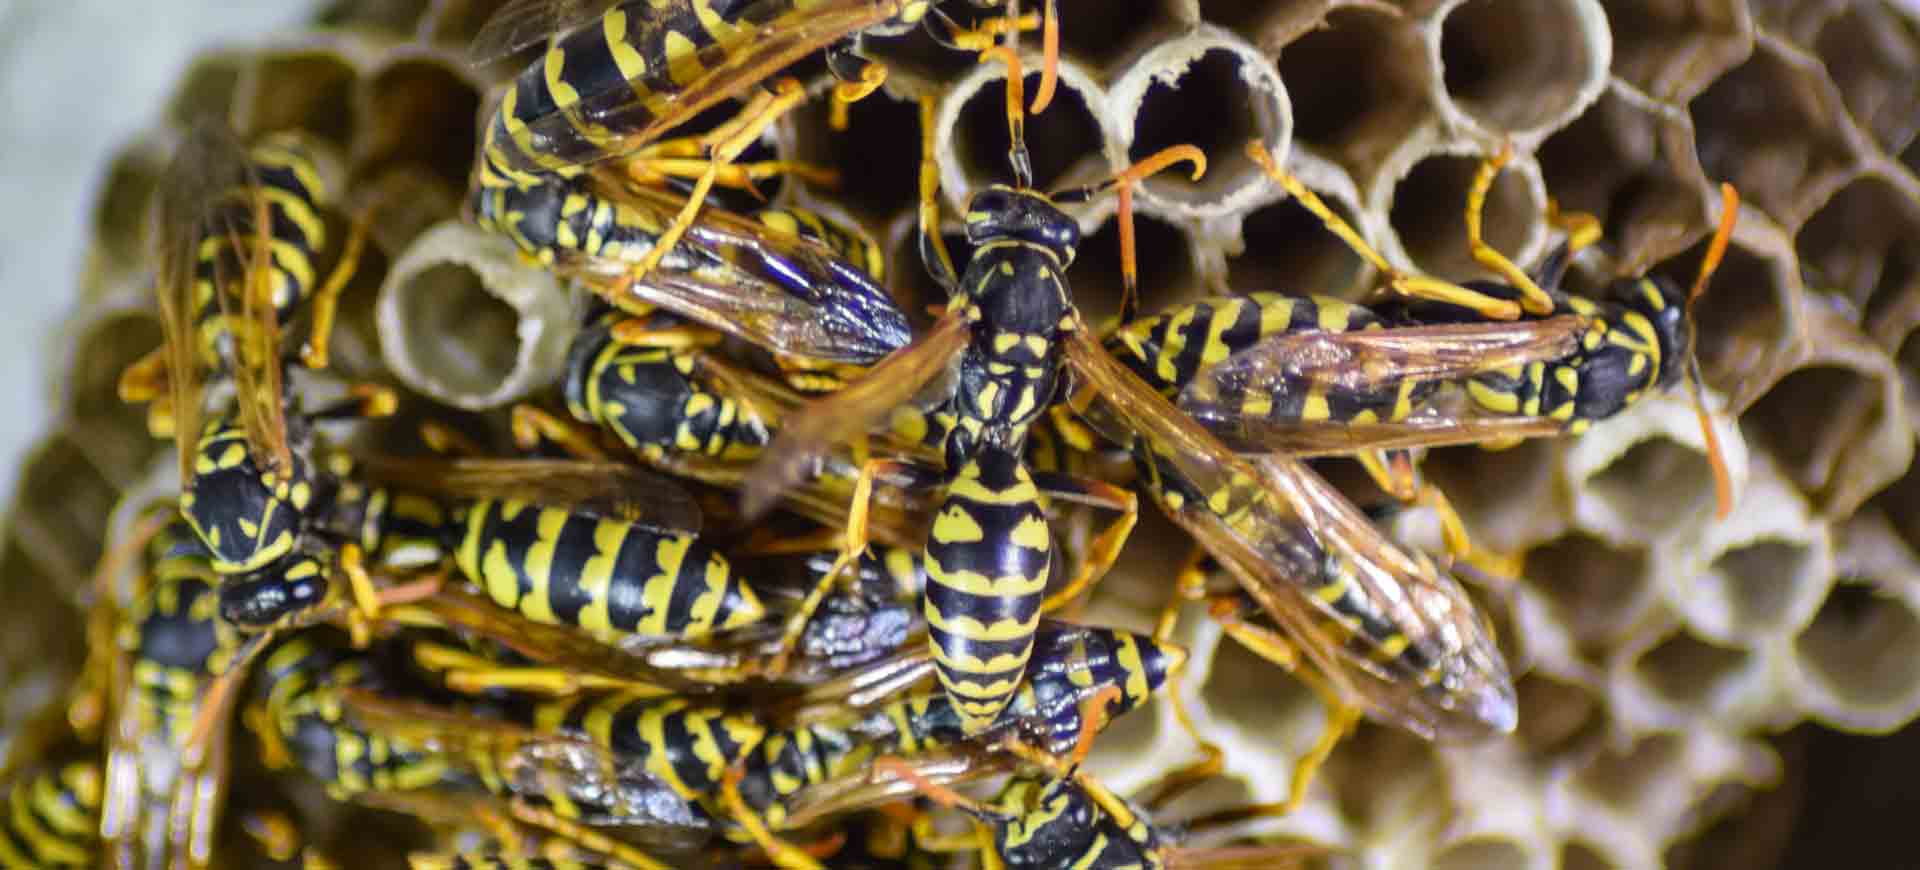 wasp pest control lakeside